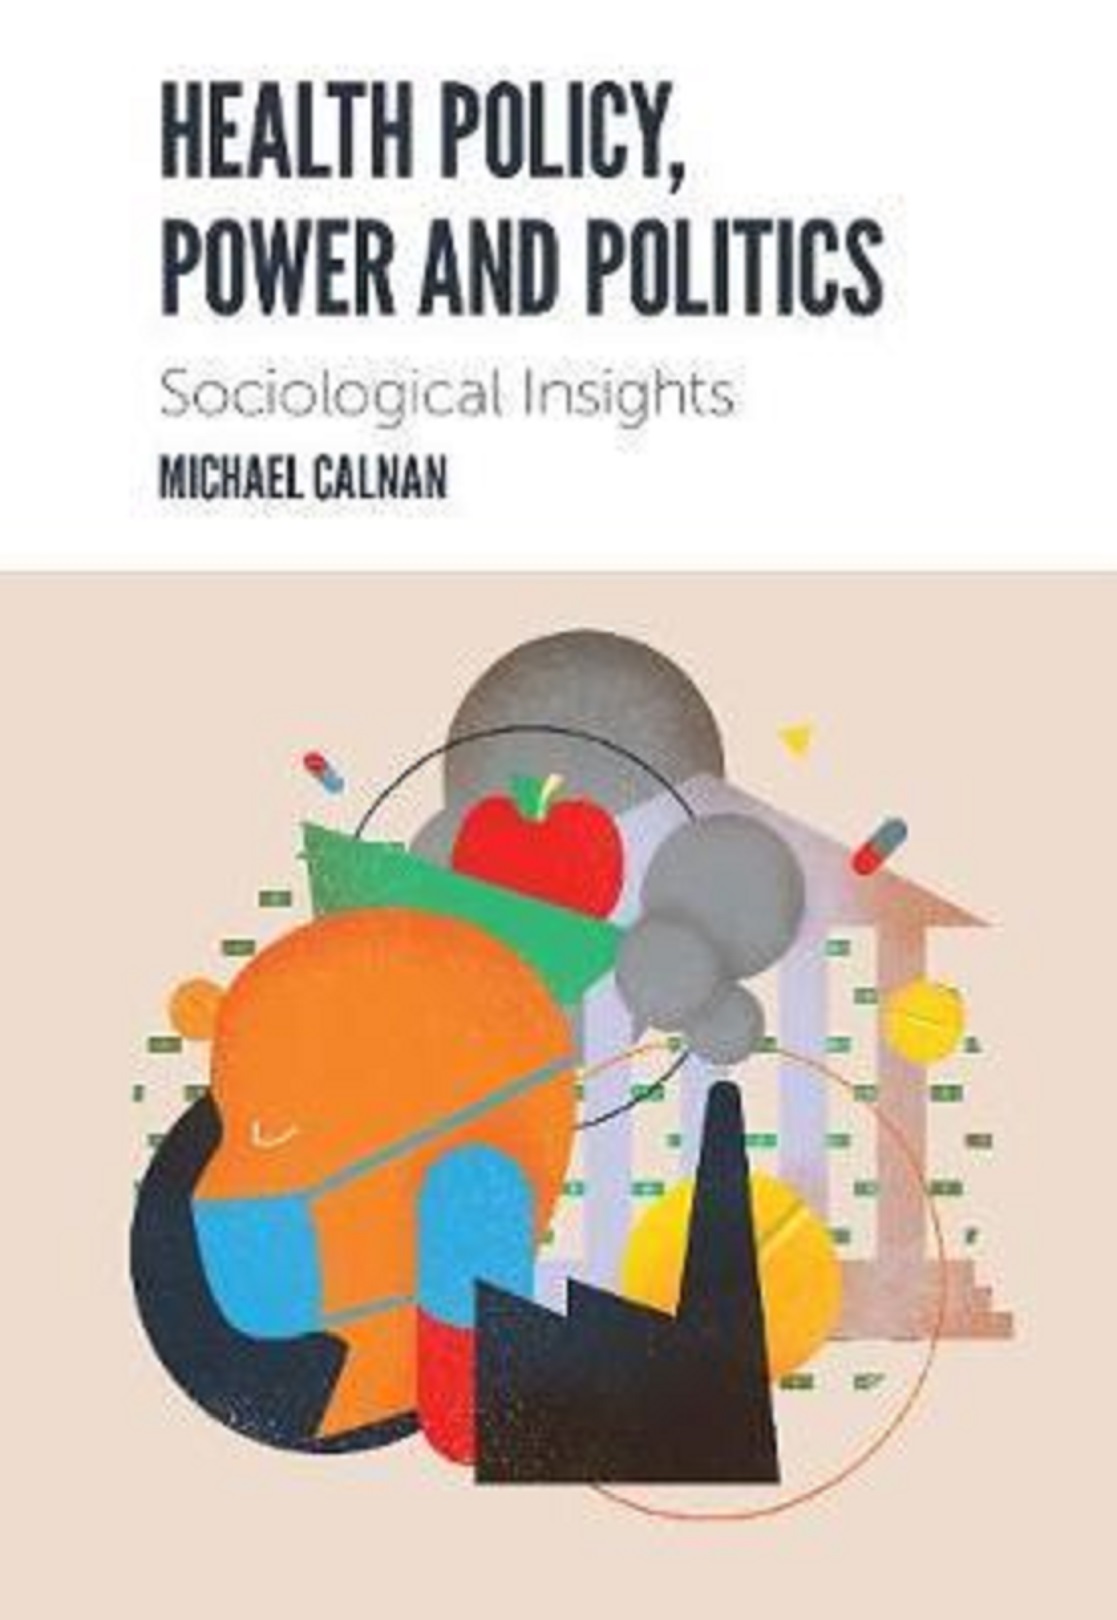 Health Policy, Power and Politics